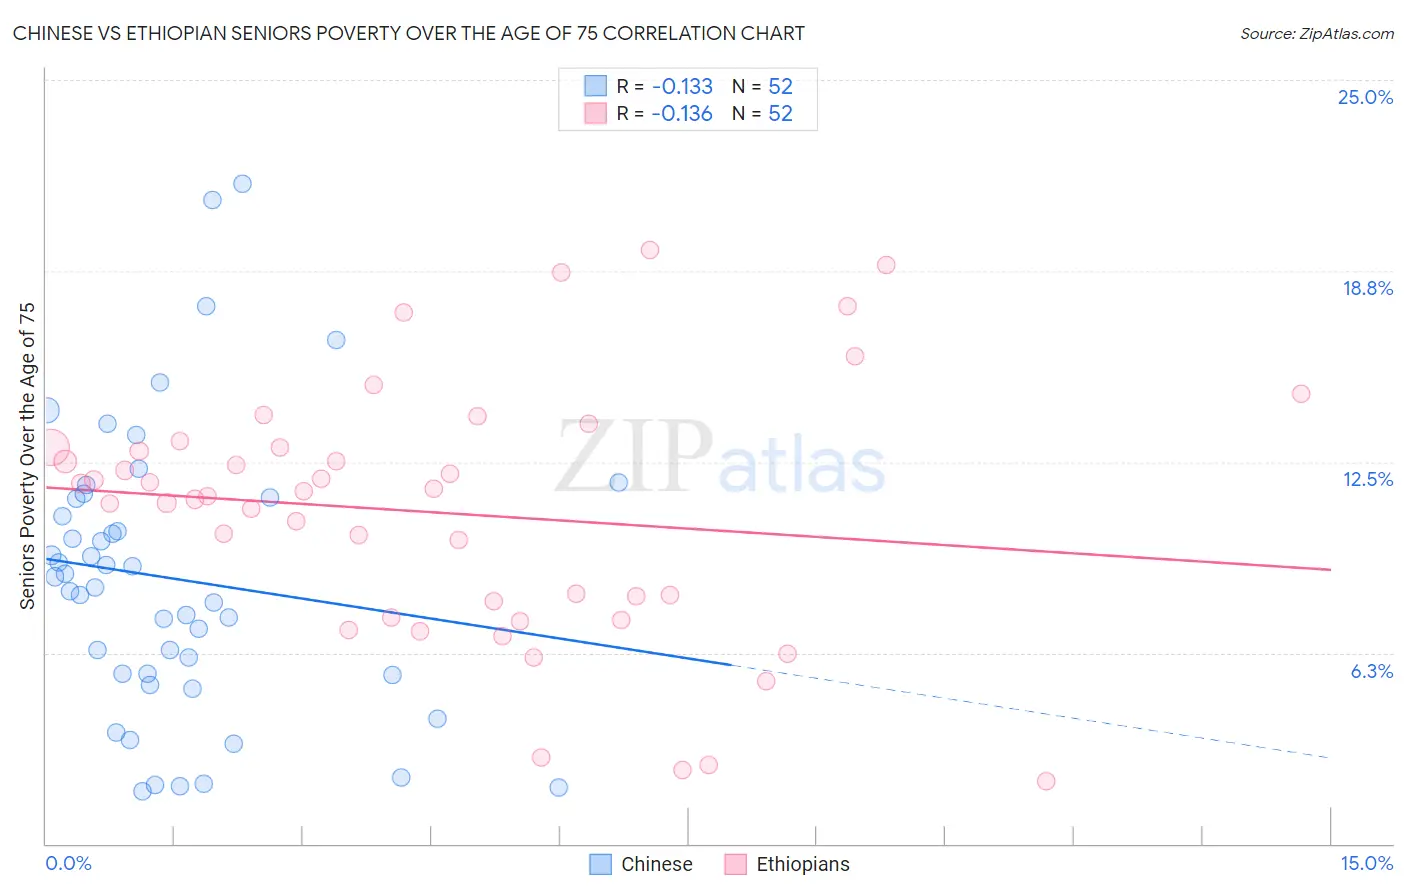 Chinese vs Ethiopian Seniors Poverty Over the Age of 75